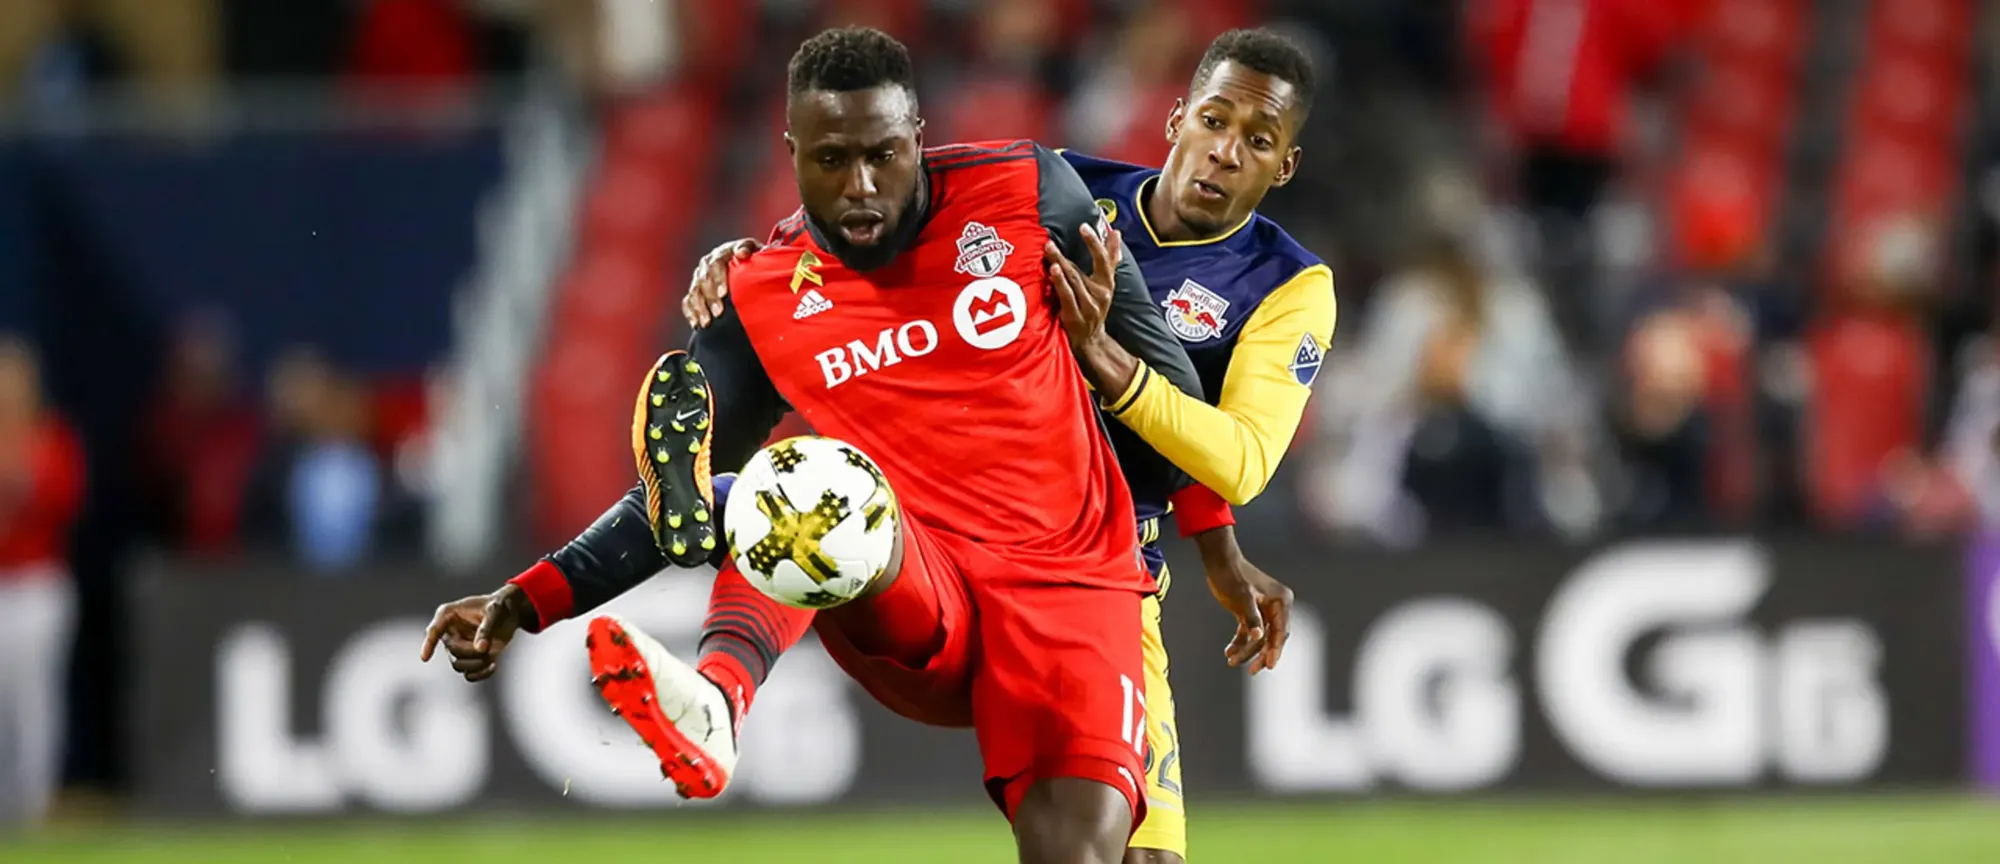 Altidore's bullishness on and off the field has served TFC well